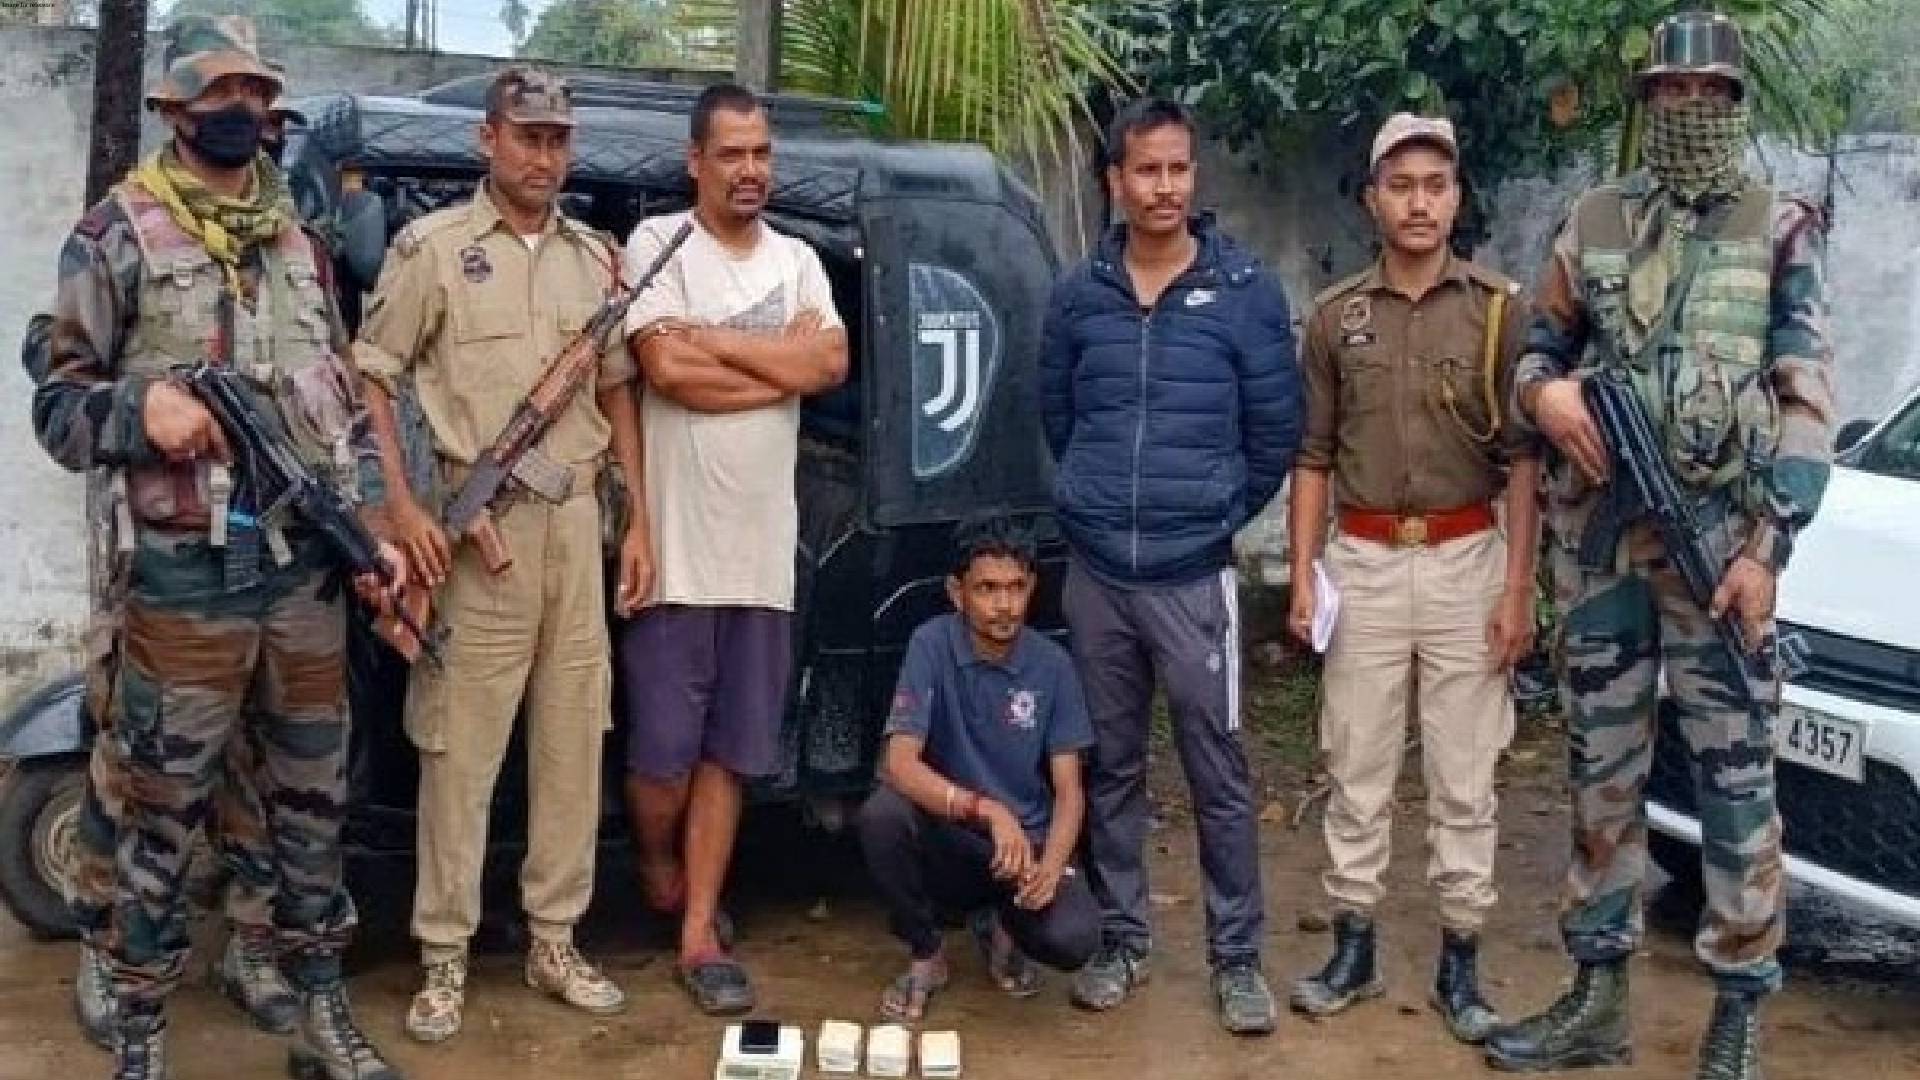 Assam Rifles seize brown sugar worth Rs 27.30 lakh from Cachar, 1 held